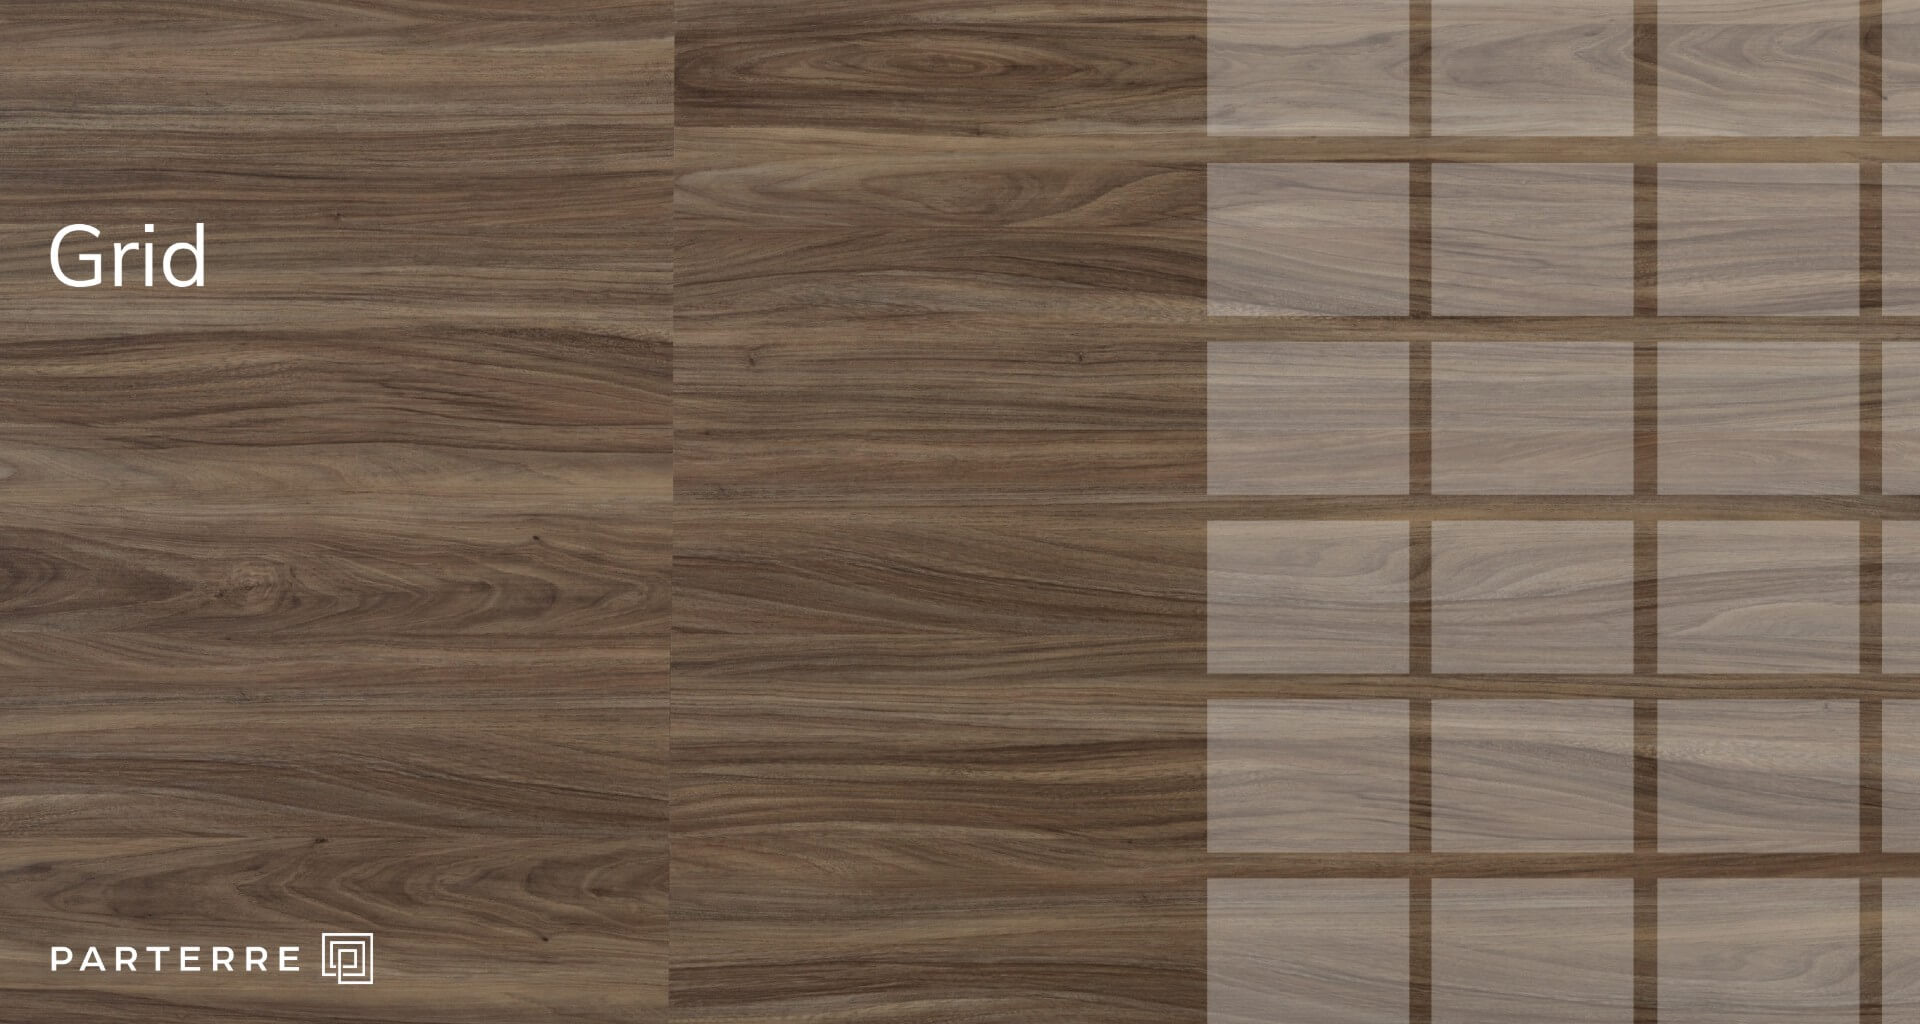 9 Vinyl Flooring Patterns for Your Next Project